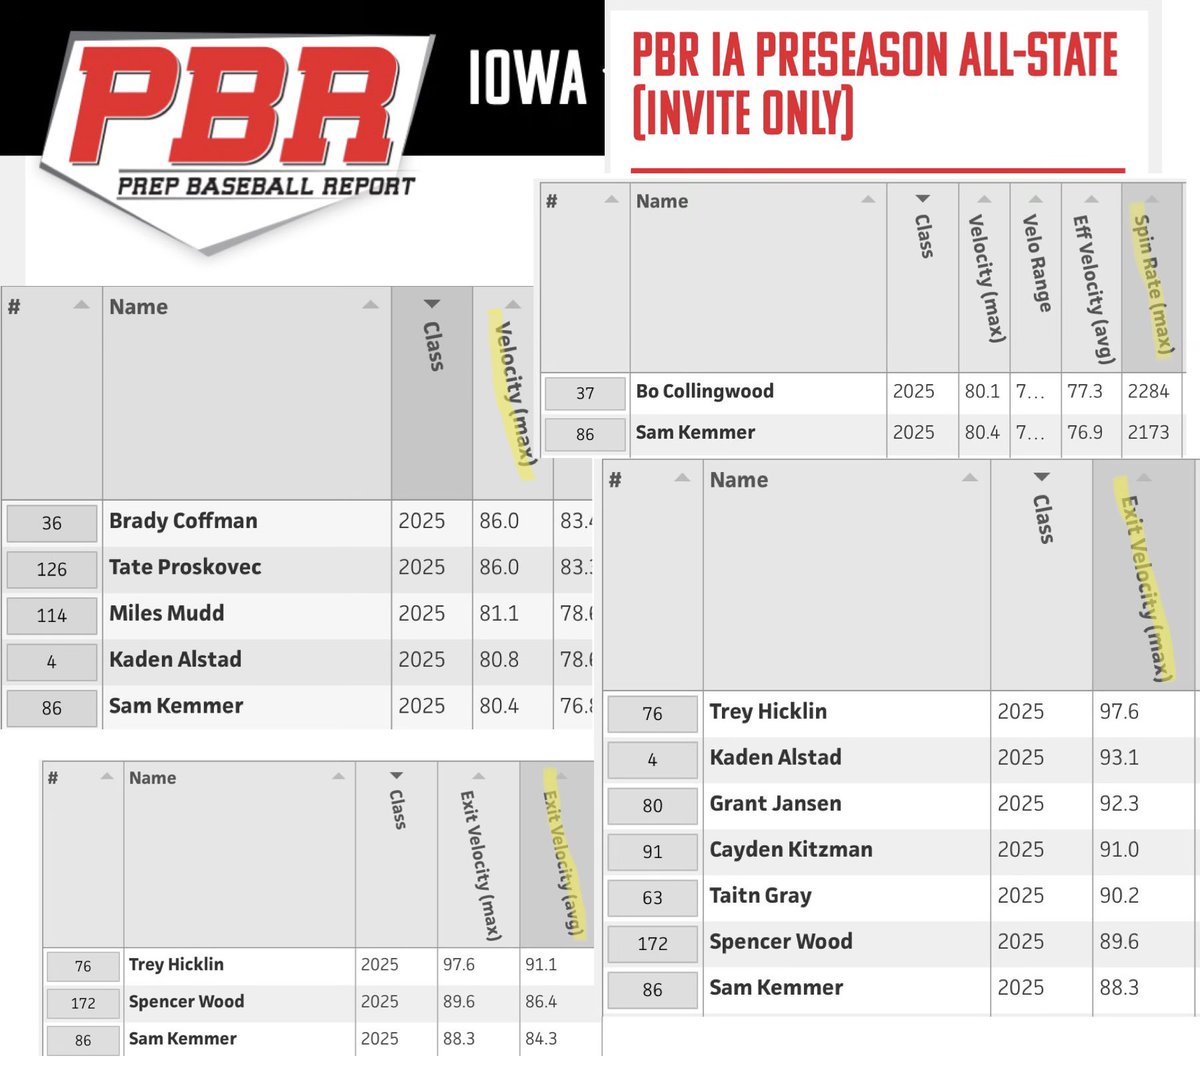 PBR IA Preseason All state Showcase

Two way player 2025 @SamKemmer5, Johnston. IA had an impressive showing with tons more in him. 

#5 FB Velo
#2 FB spin rate 
#7 Exit Velo
#3 Avg Exit Velo

@PBRIowa @PBR_Nevada @JohnstonDragons @PBR_Uncommitted 

#grinder #bestisahead